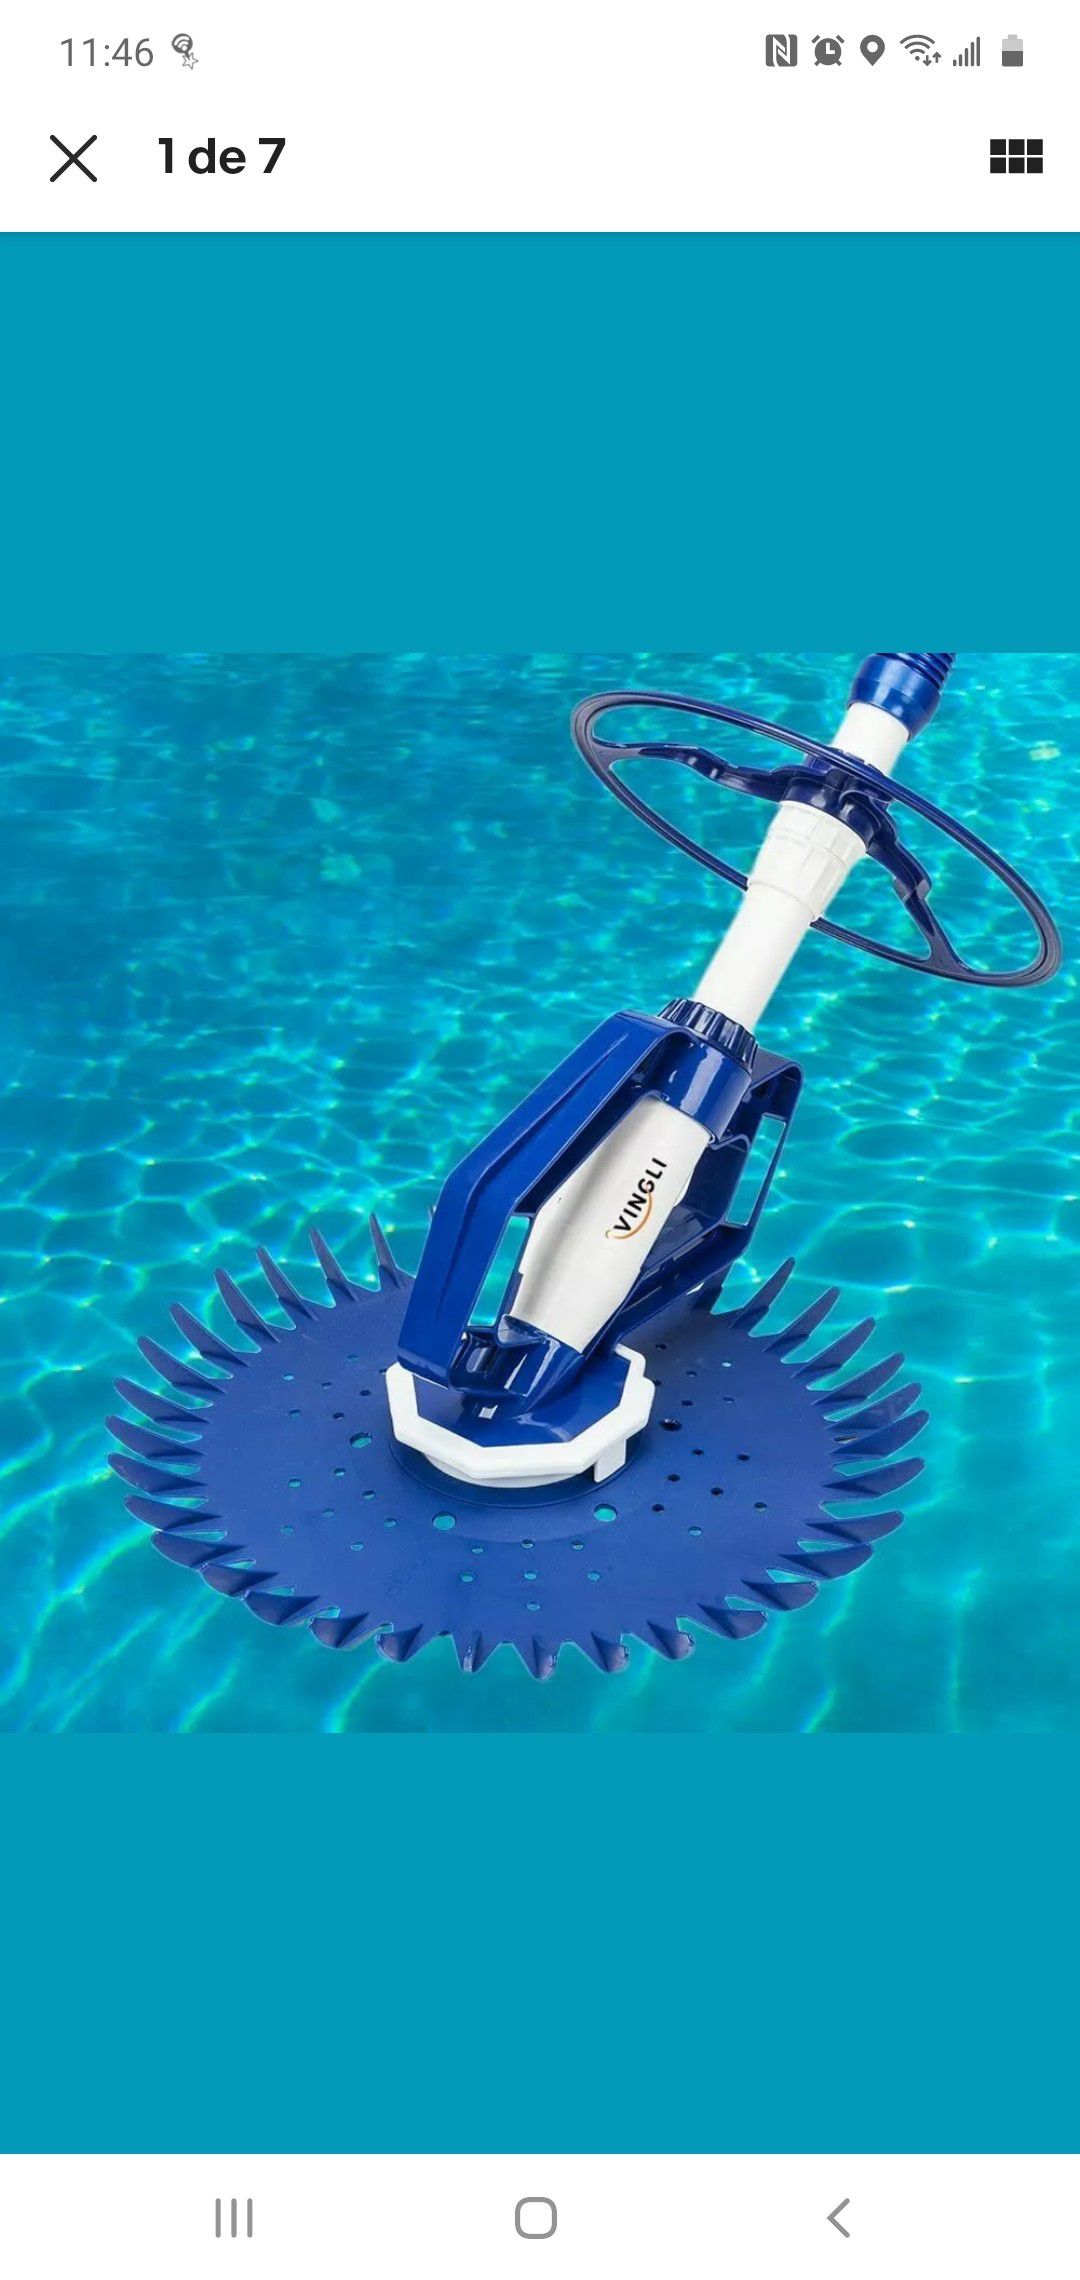 Pool Sweeper Automatic Vacuum Cleaner Swimming Suction Side Climb Wall In Ground